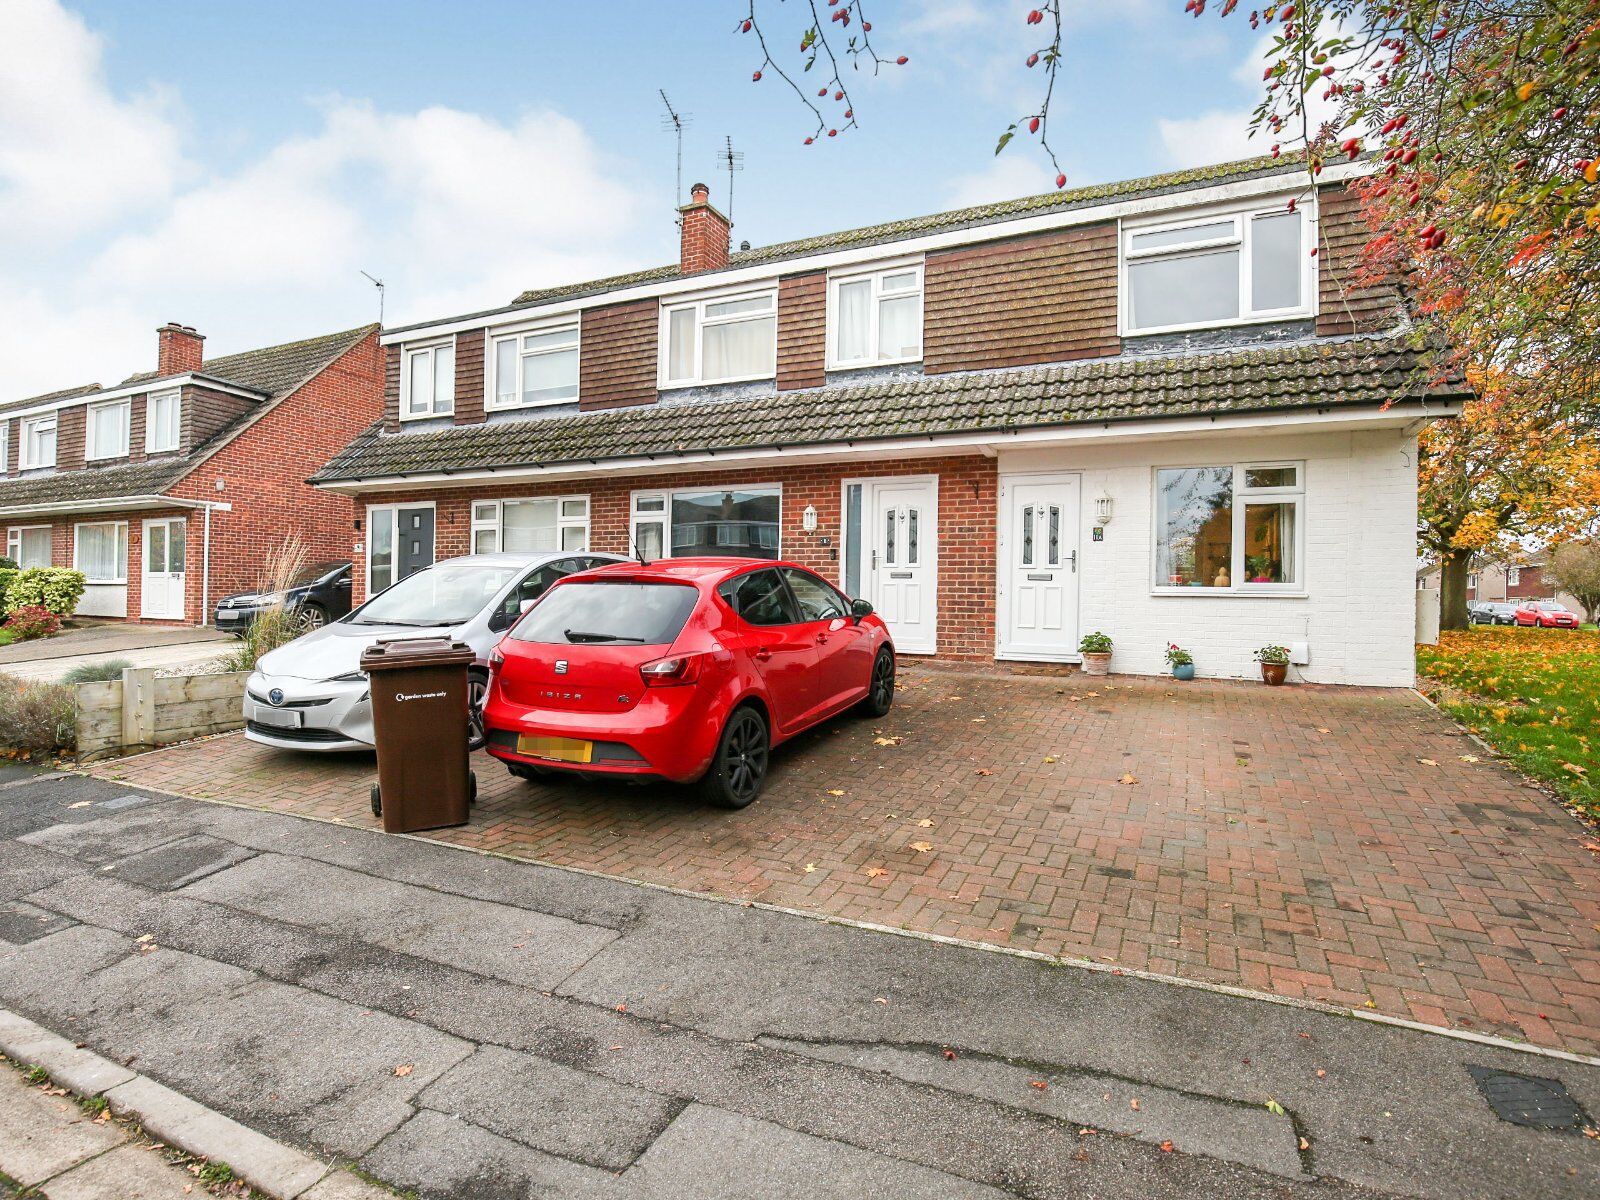 2 bedroom end terraced house for sale Stenton Close, Abingdon, OX14, main image